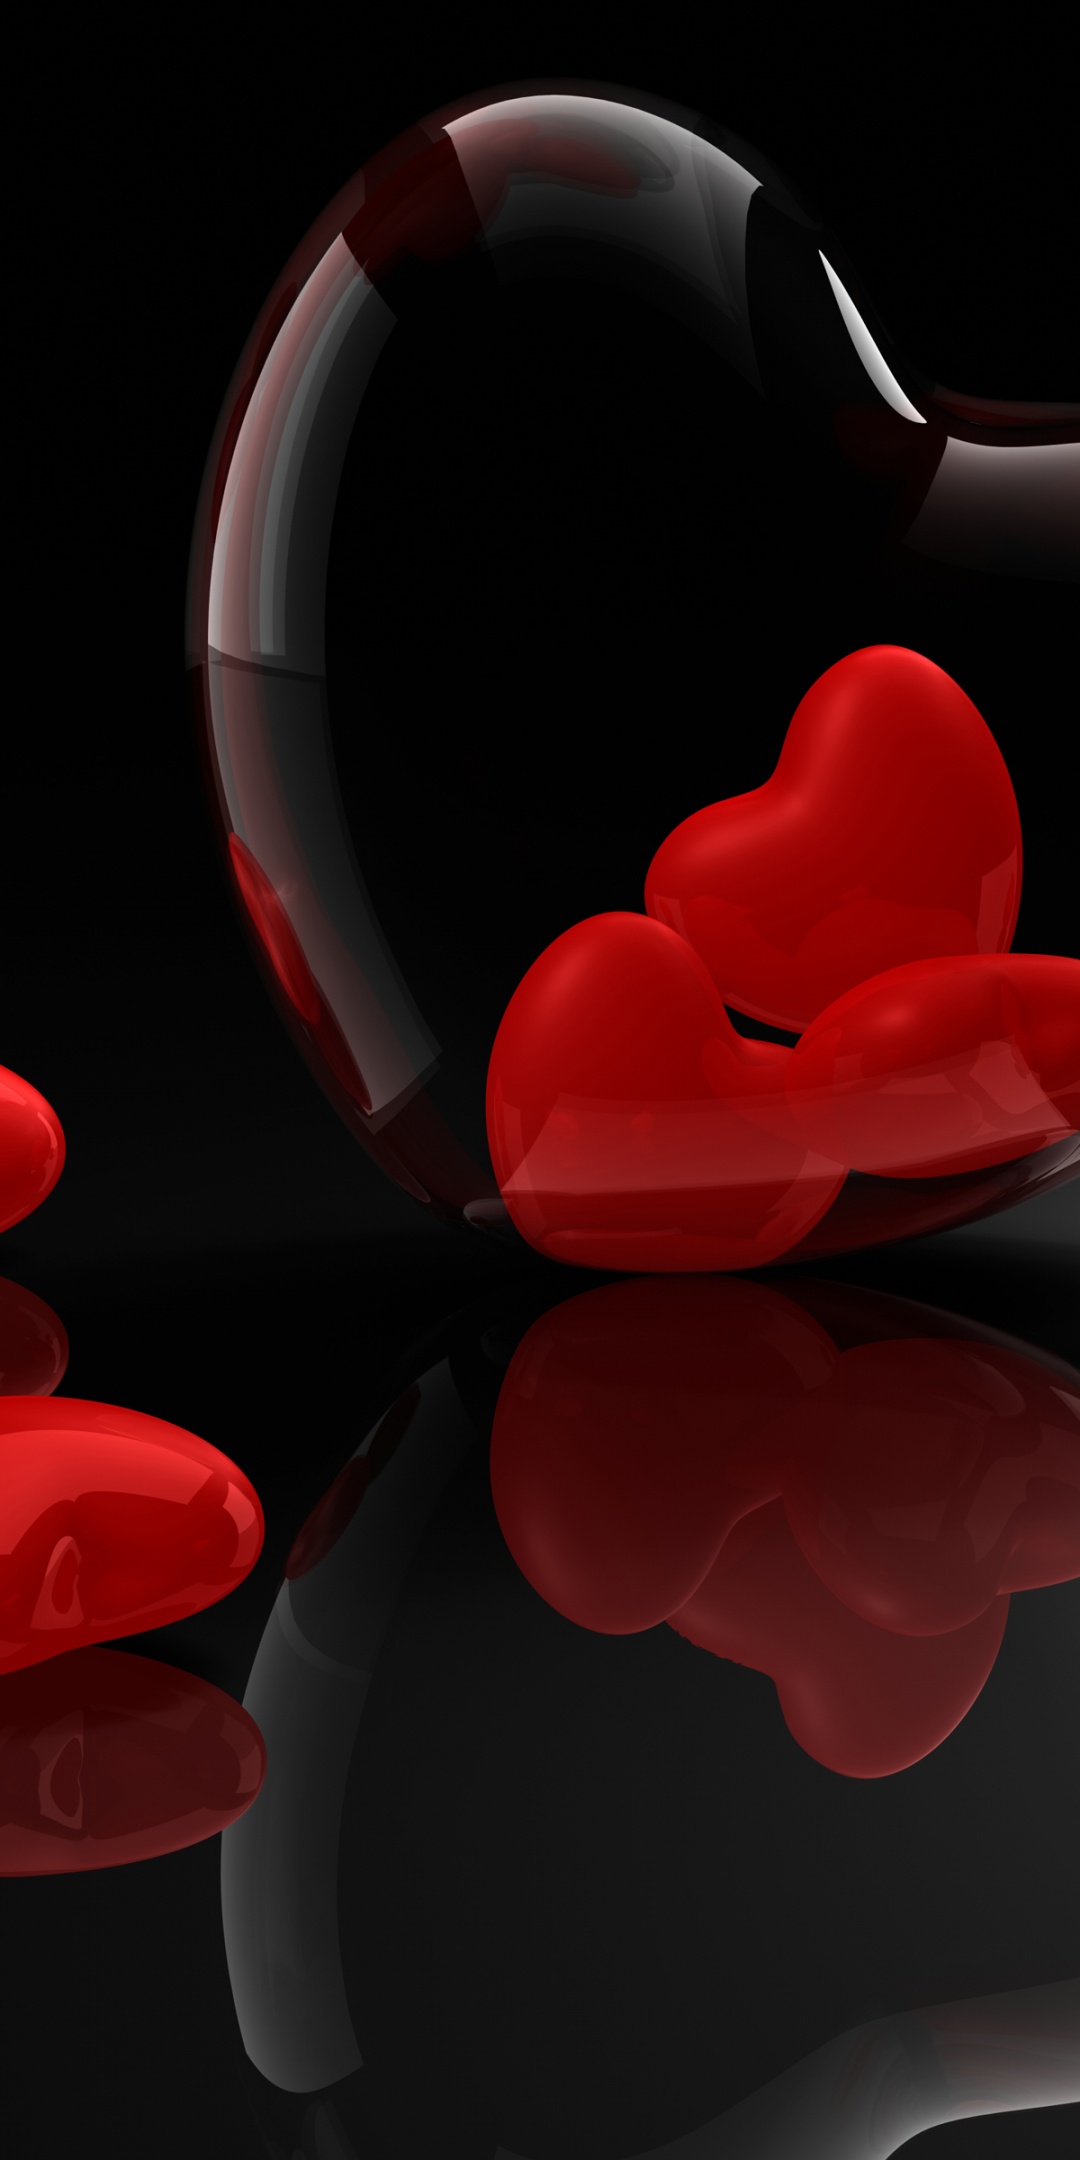 3D Hearts Reflection Valentines Day